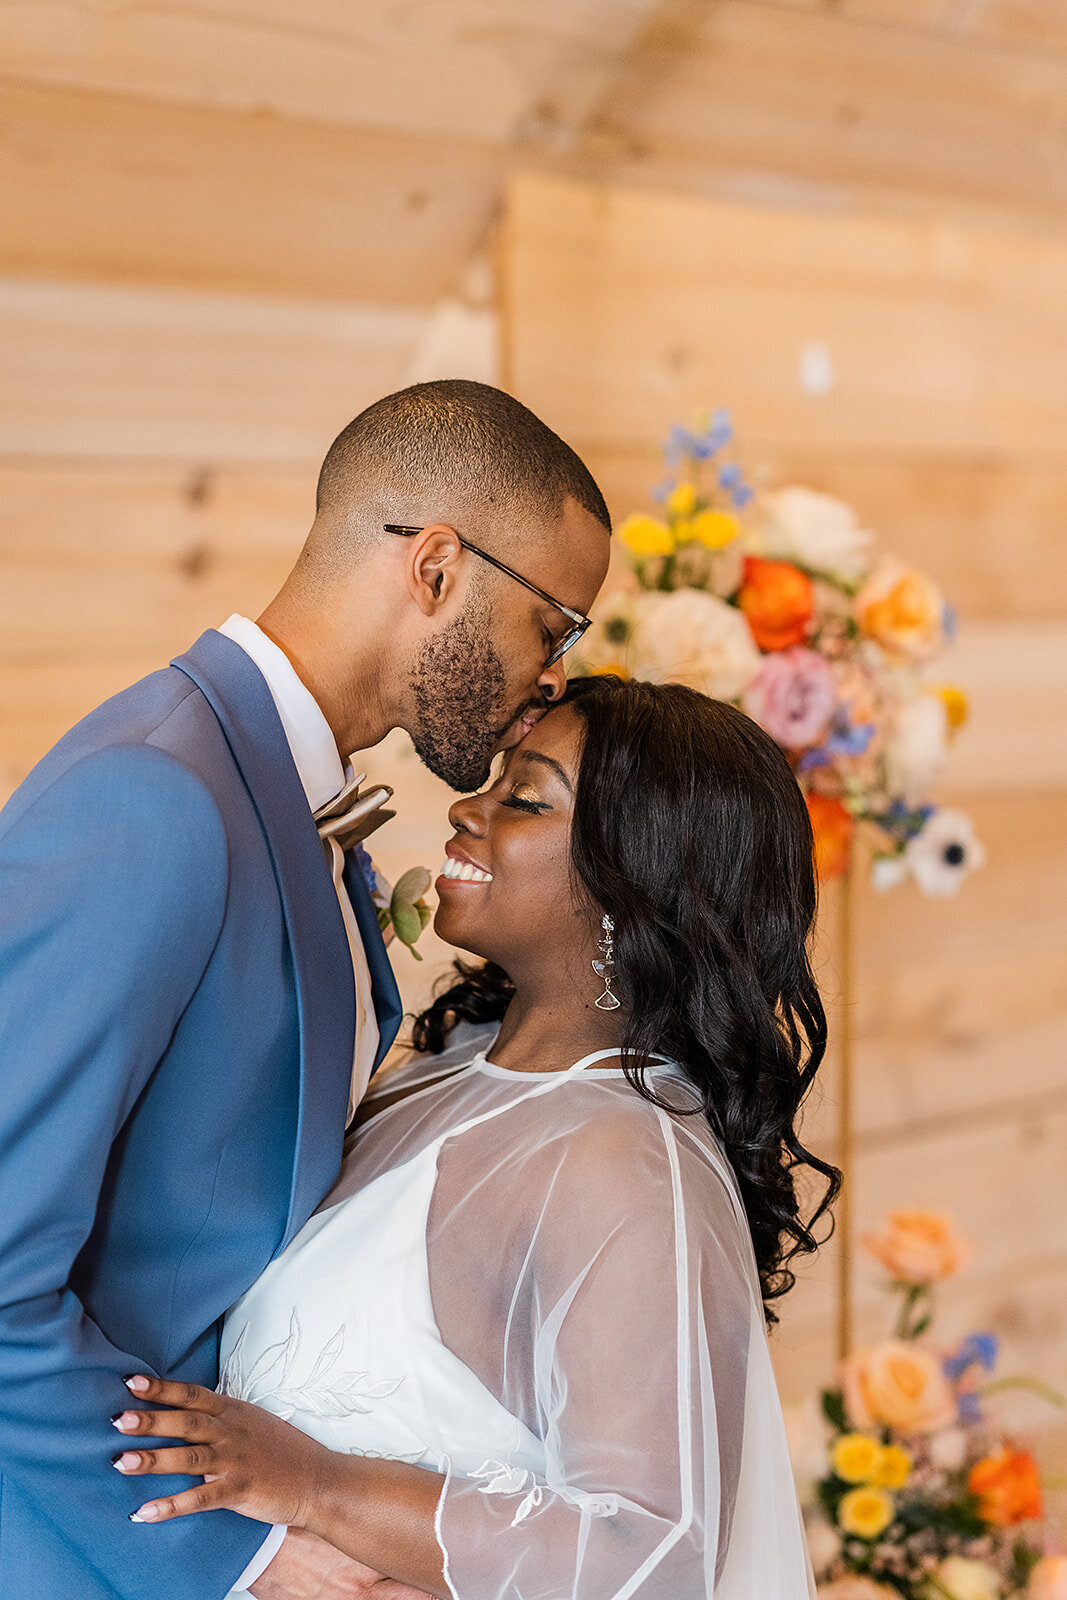 Black couple embracing , groom kissing forehead, colorful flowers in the backround